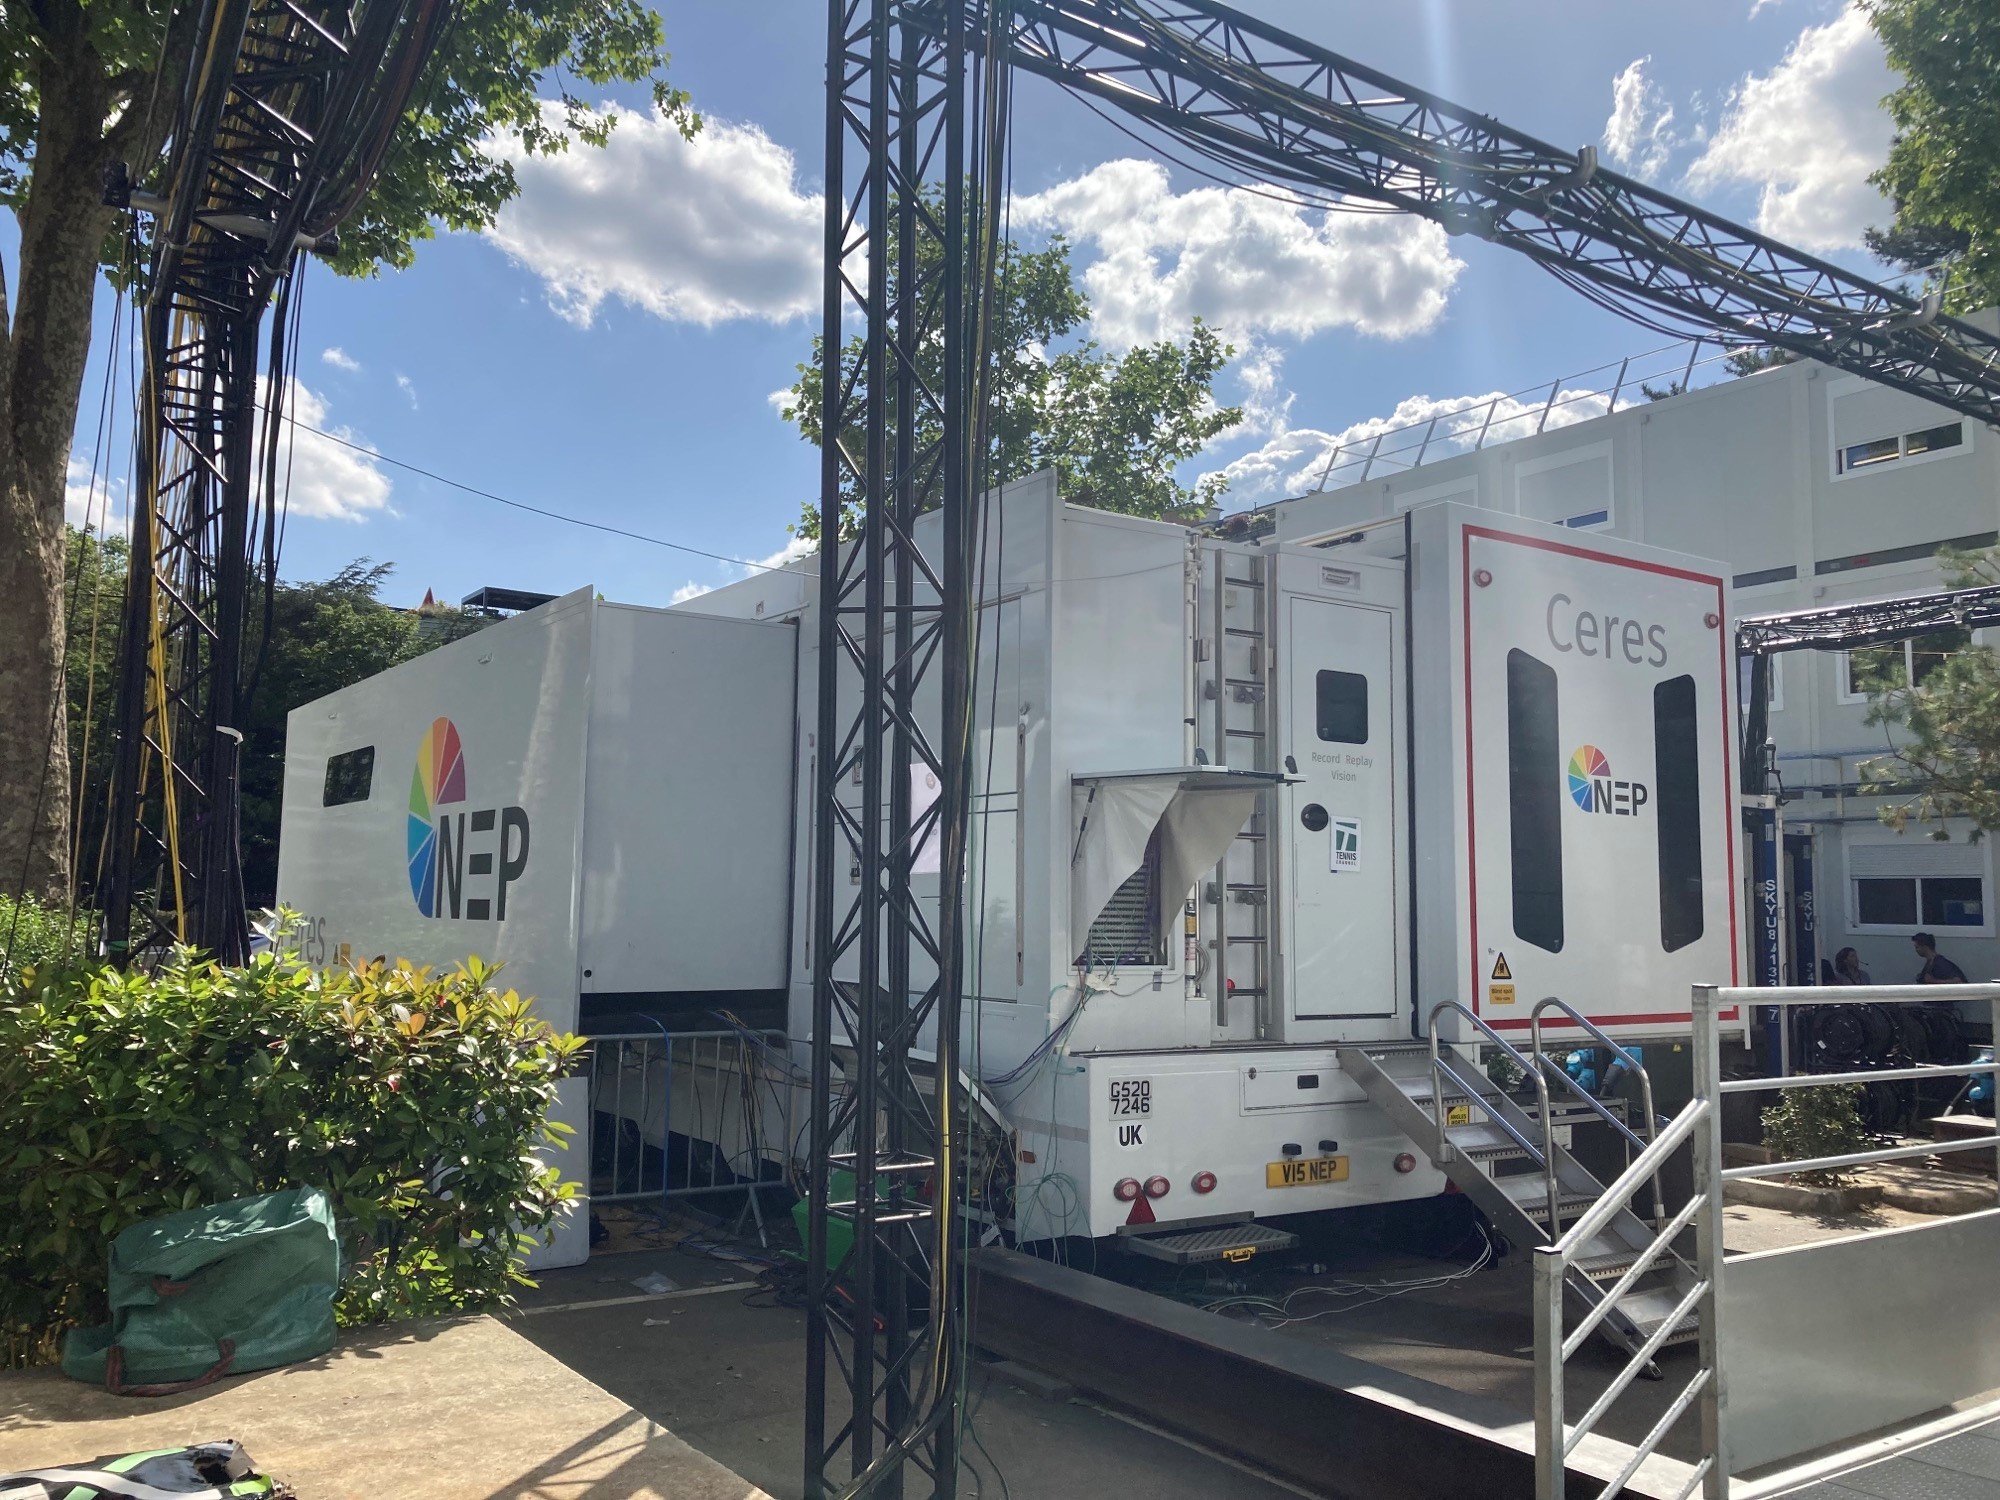 2022 French Open Tennis Channel Shifts to NEPs Ceres Mobile Unit for 16th Year at Roland Garros